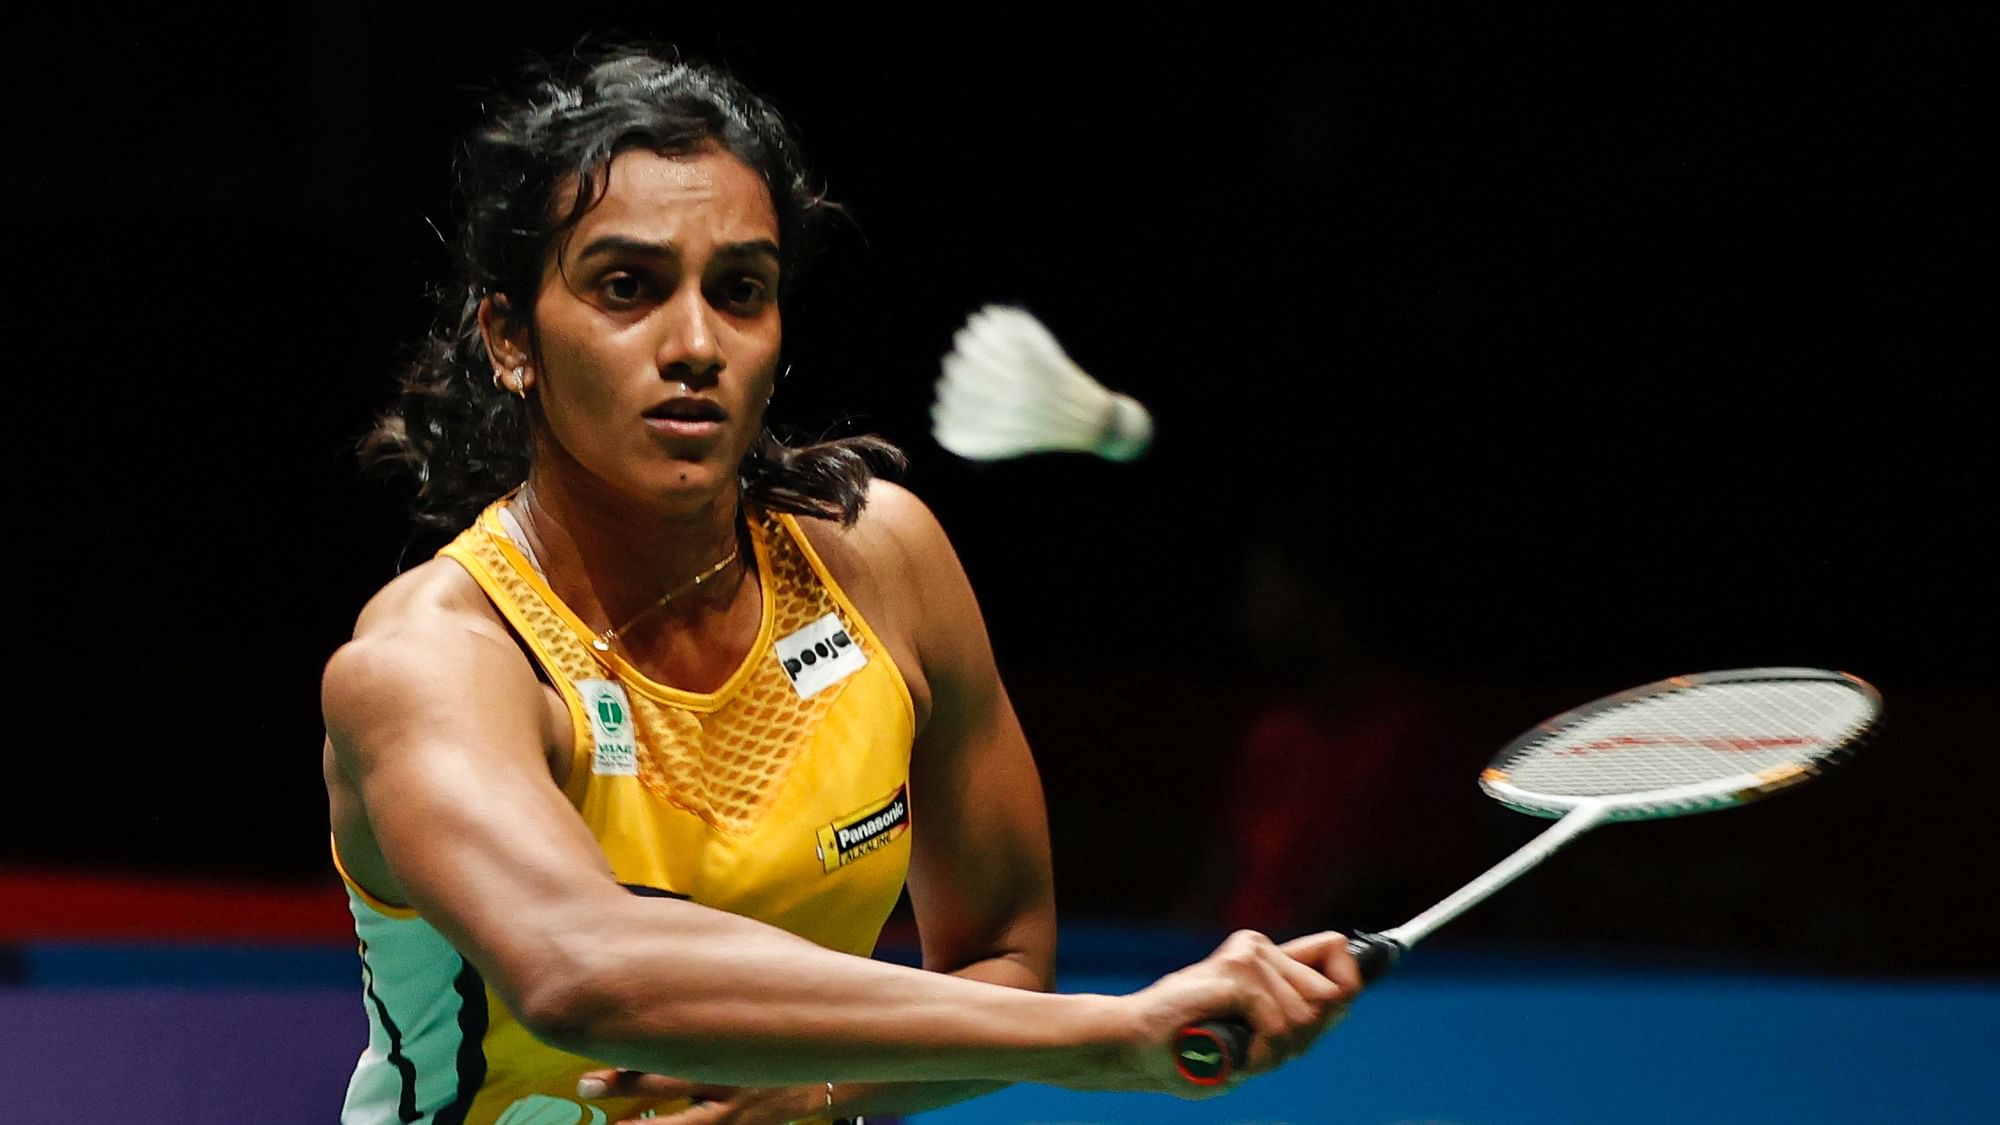 Star shuttler PV Sindhu expectedly beat Rituparna Das on Wednesday, 5 February even as her side Hyderabad Hunters has been knocked out of the Premier Badminton League (PBL).